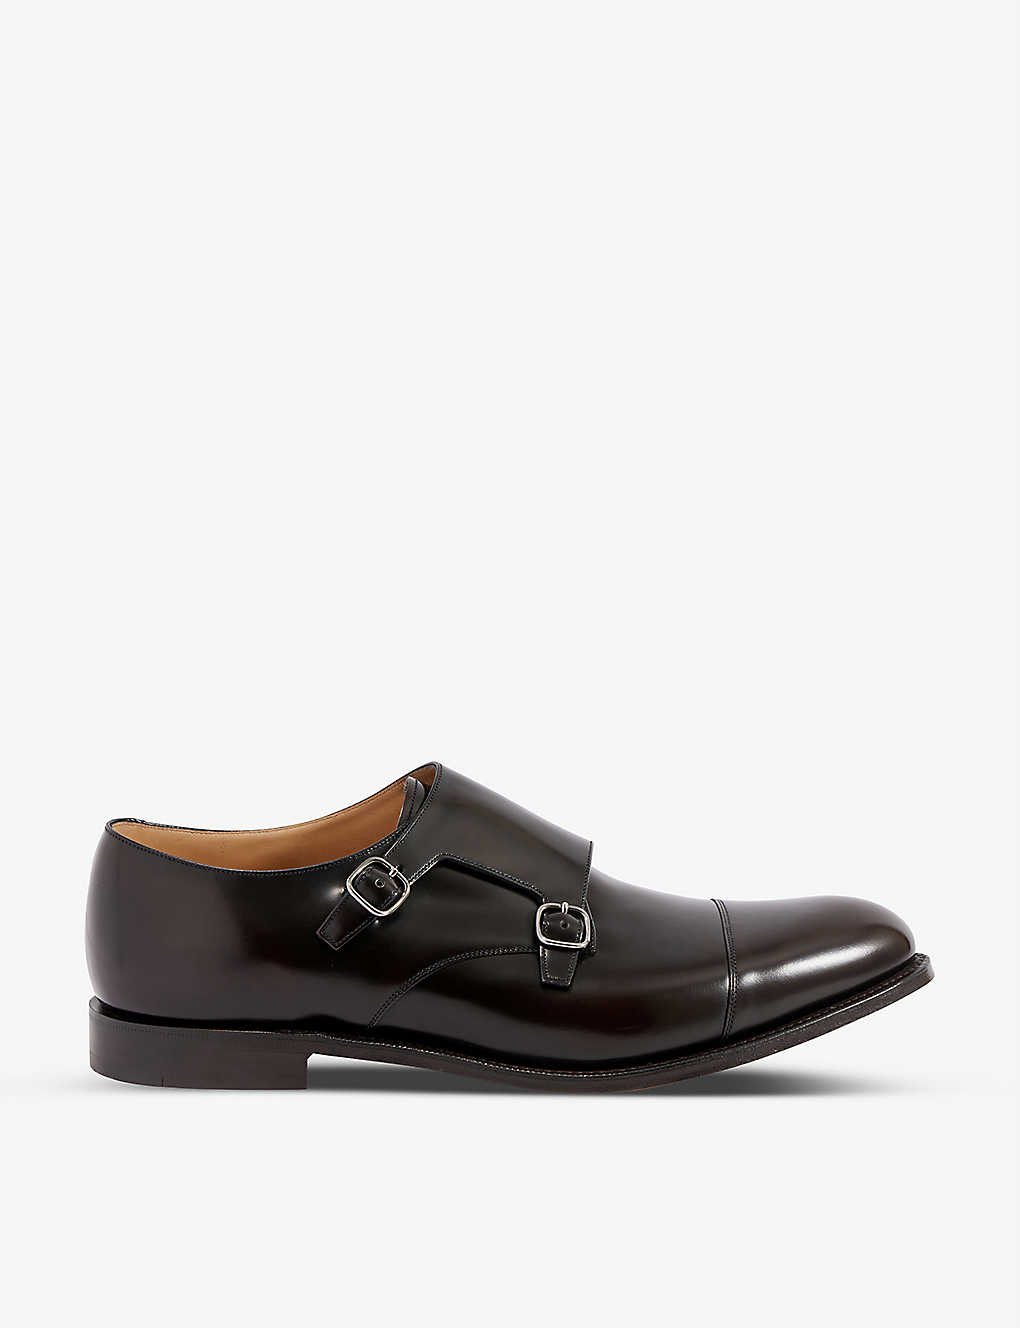 Church Detroit Double Leather Monk Shoes In Dark Brown